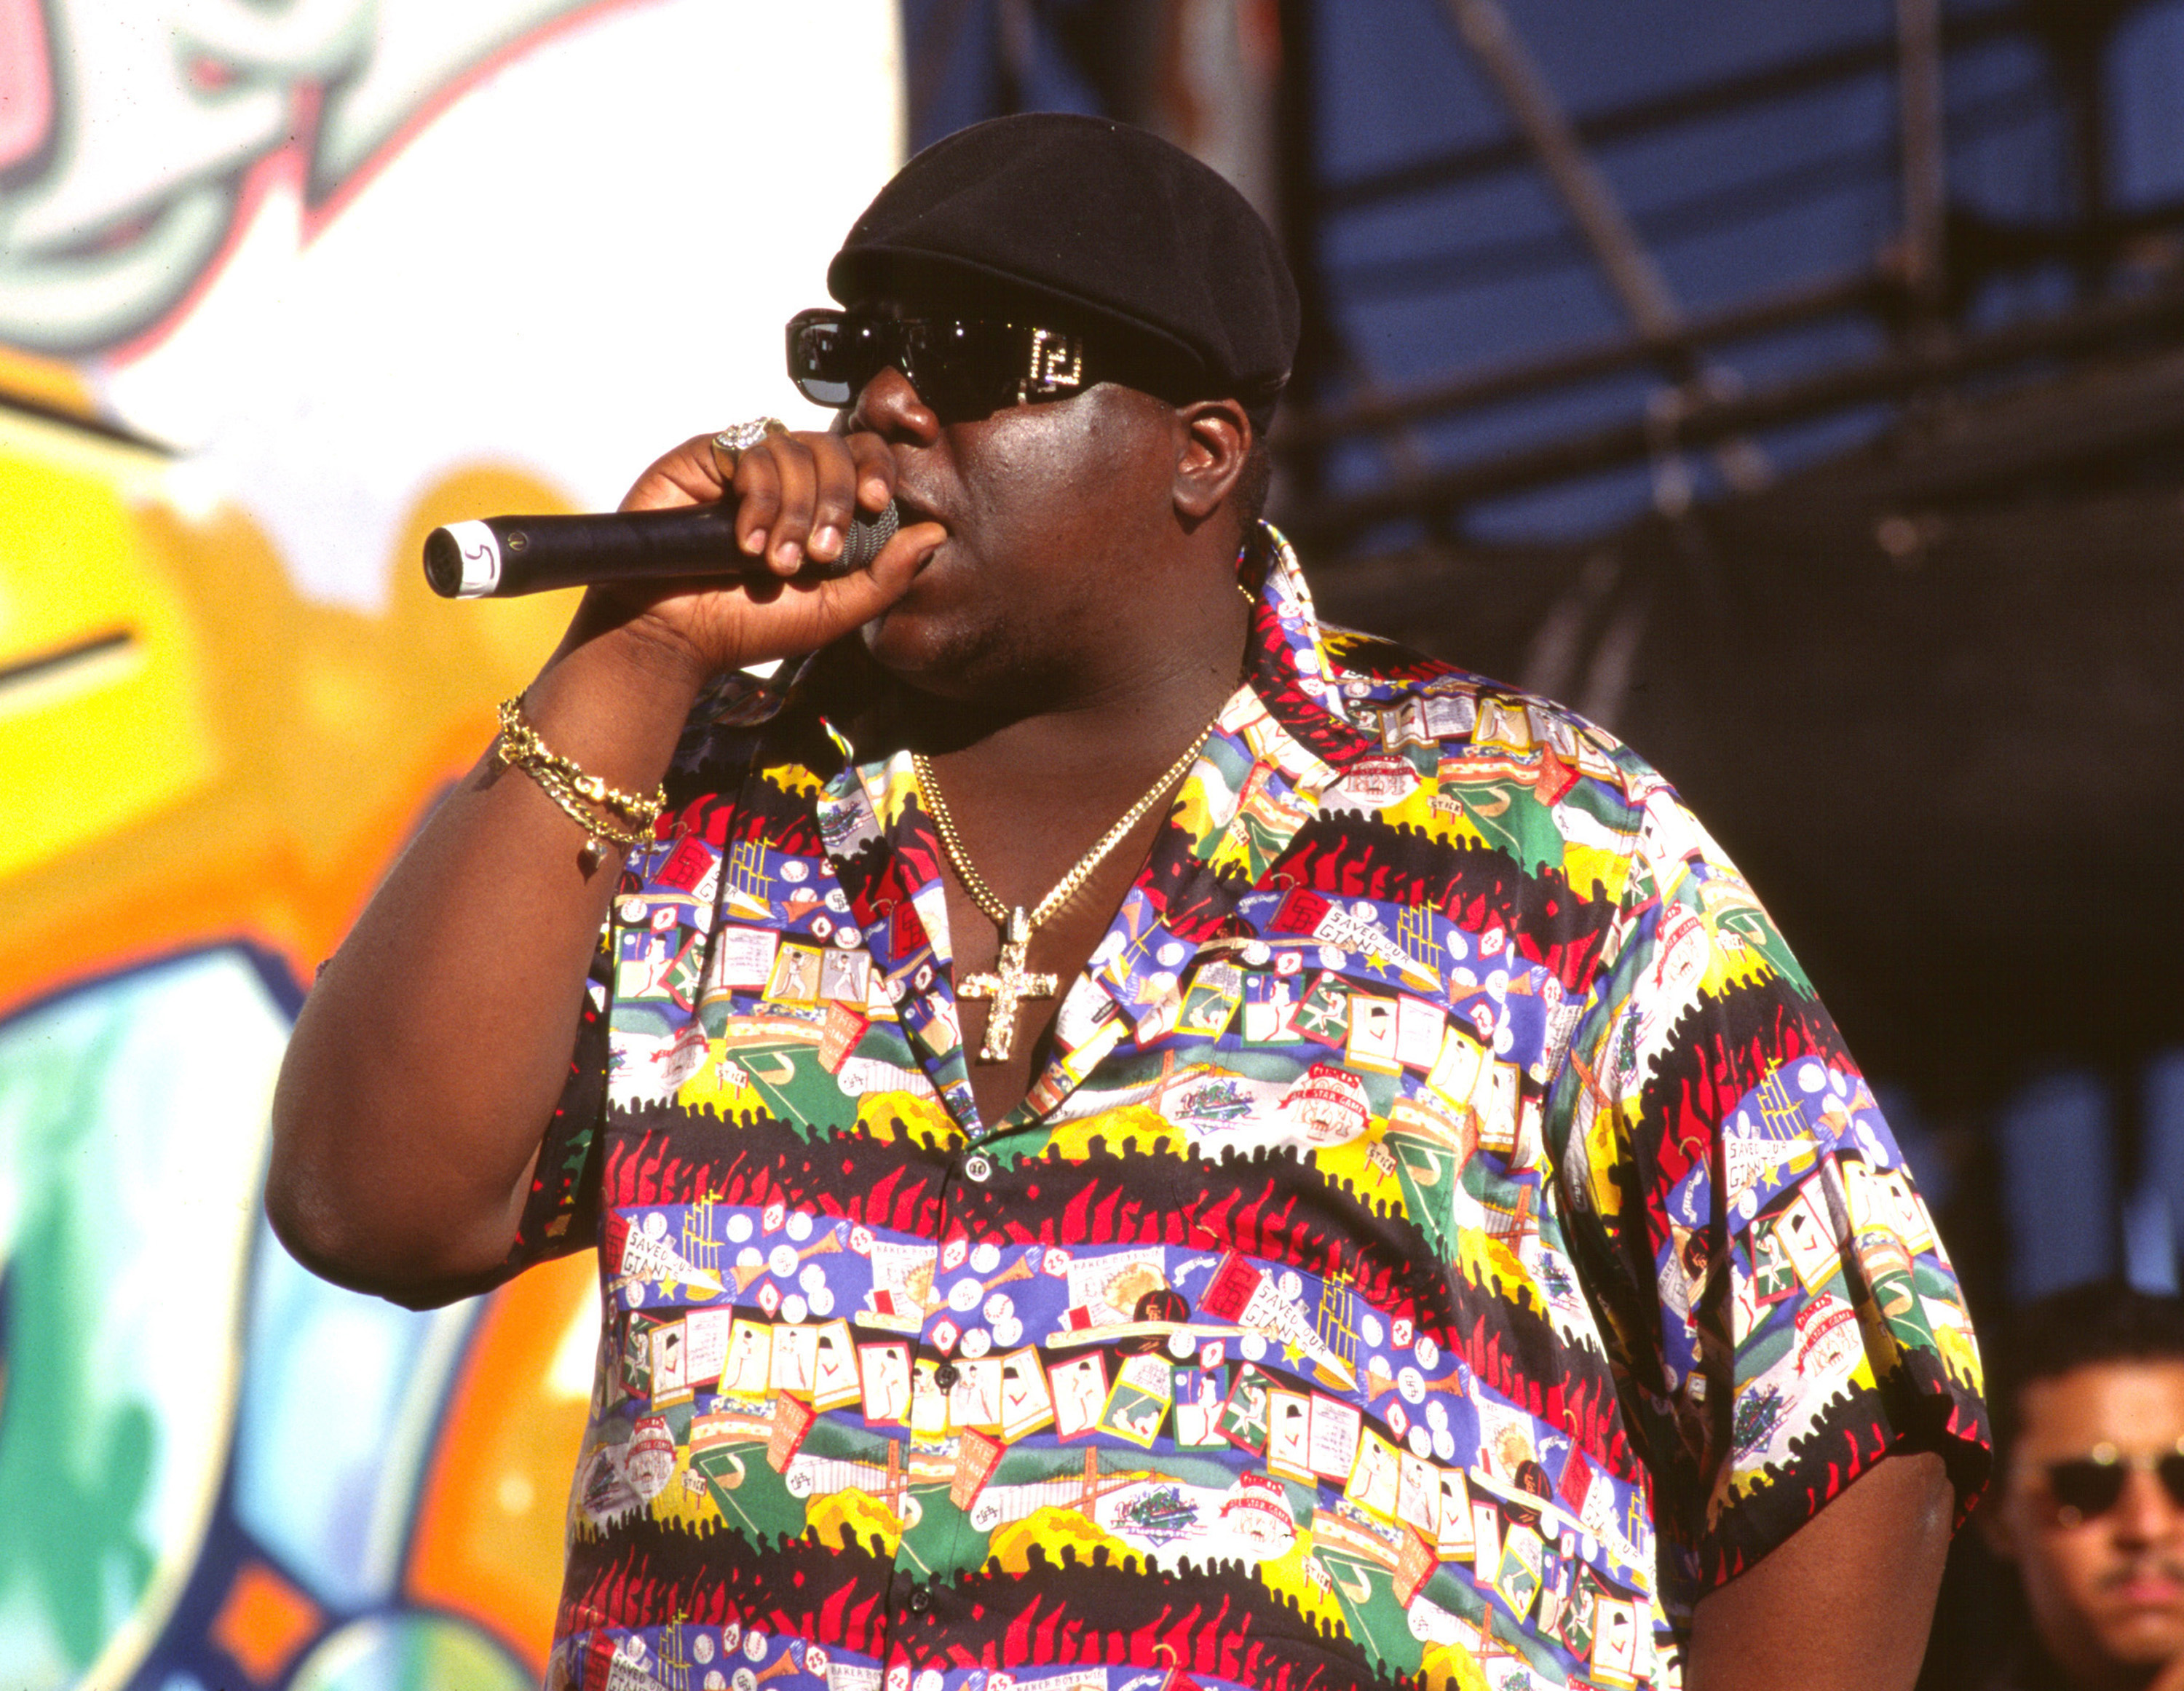 The Notorious B.I.G., who signed a record deal while he was a drug dealer, performing on stage